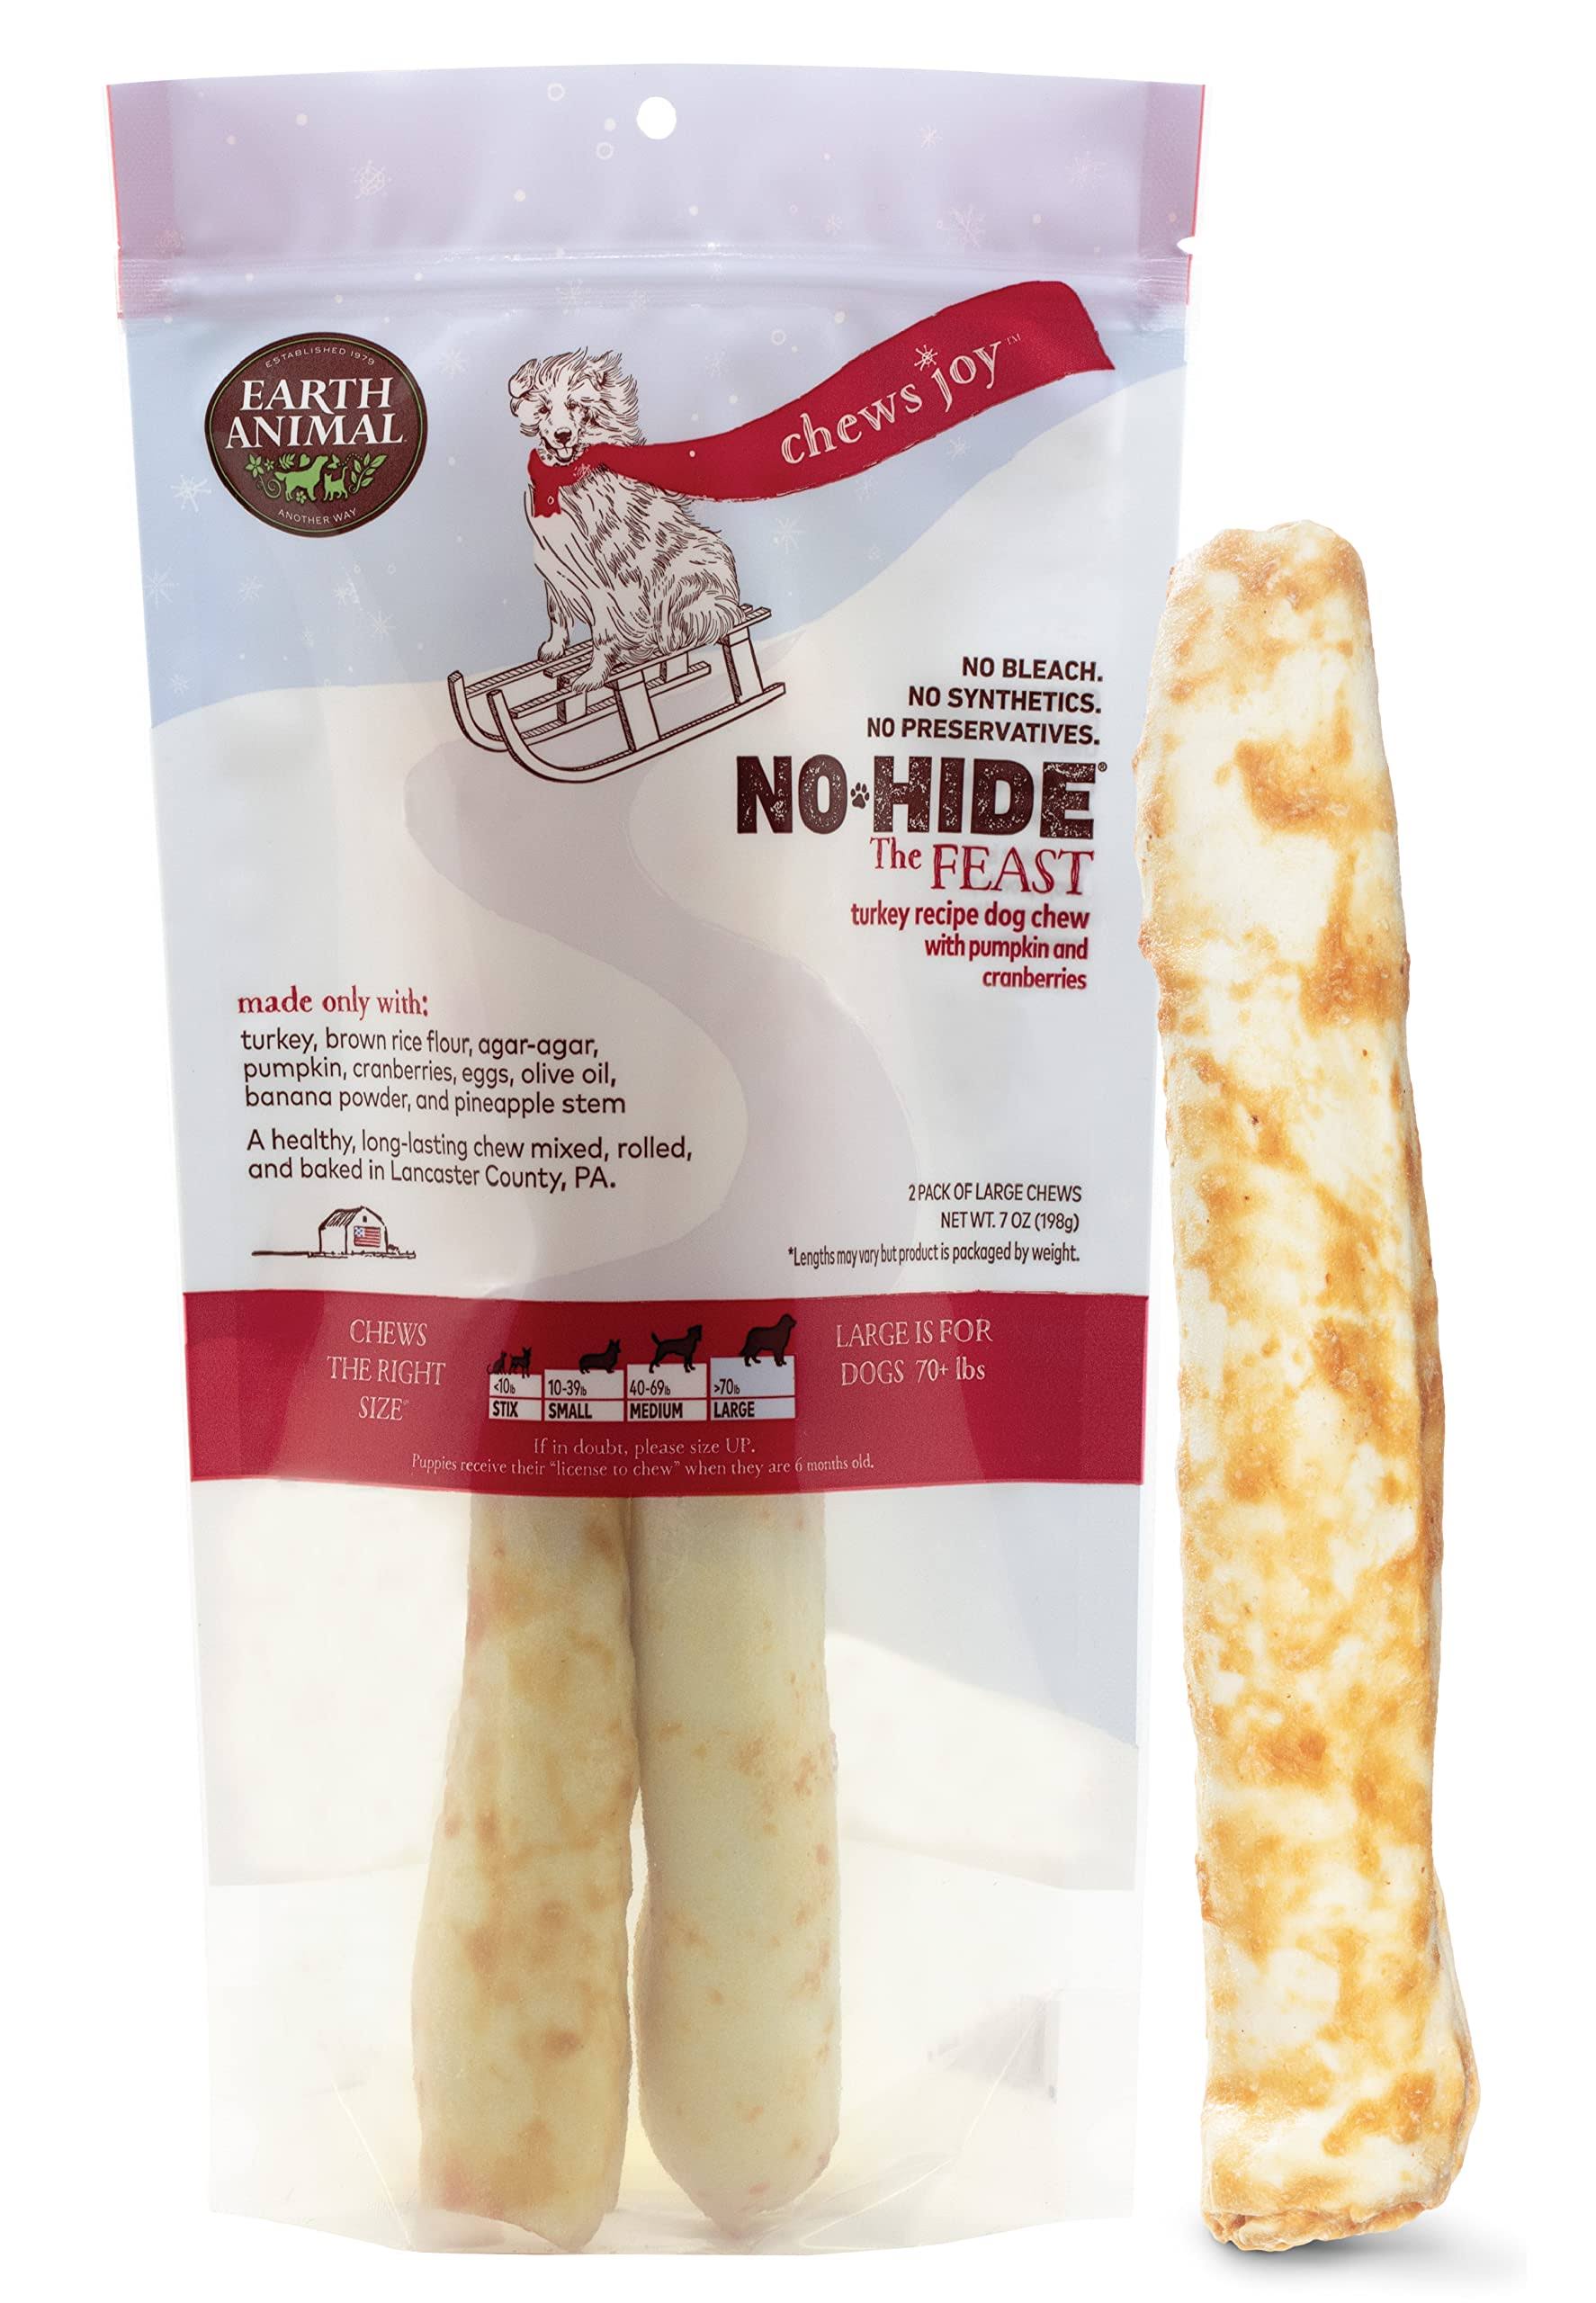 Earth Animal No Hide Large 2pk - The Feast